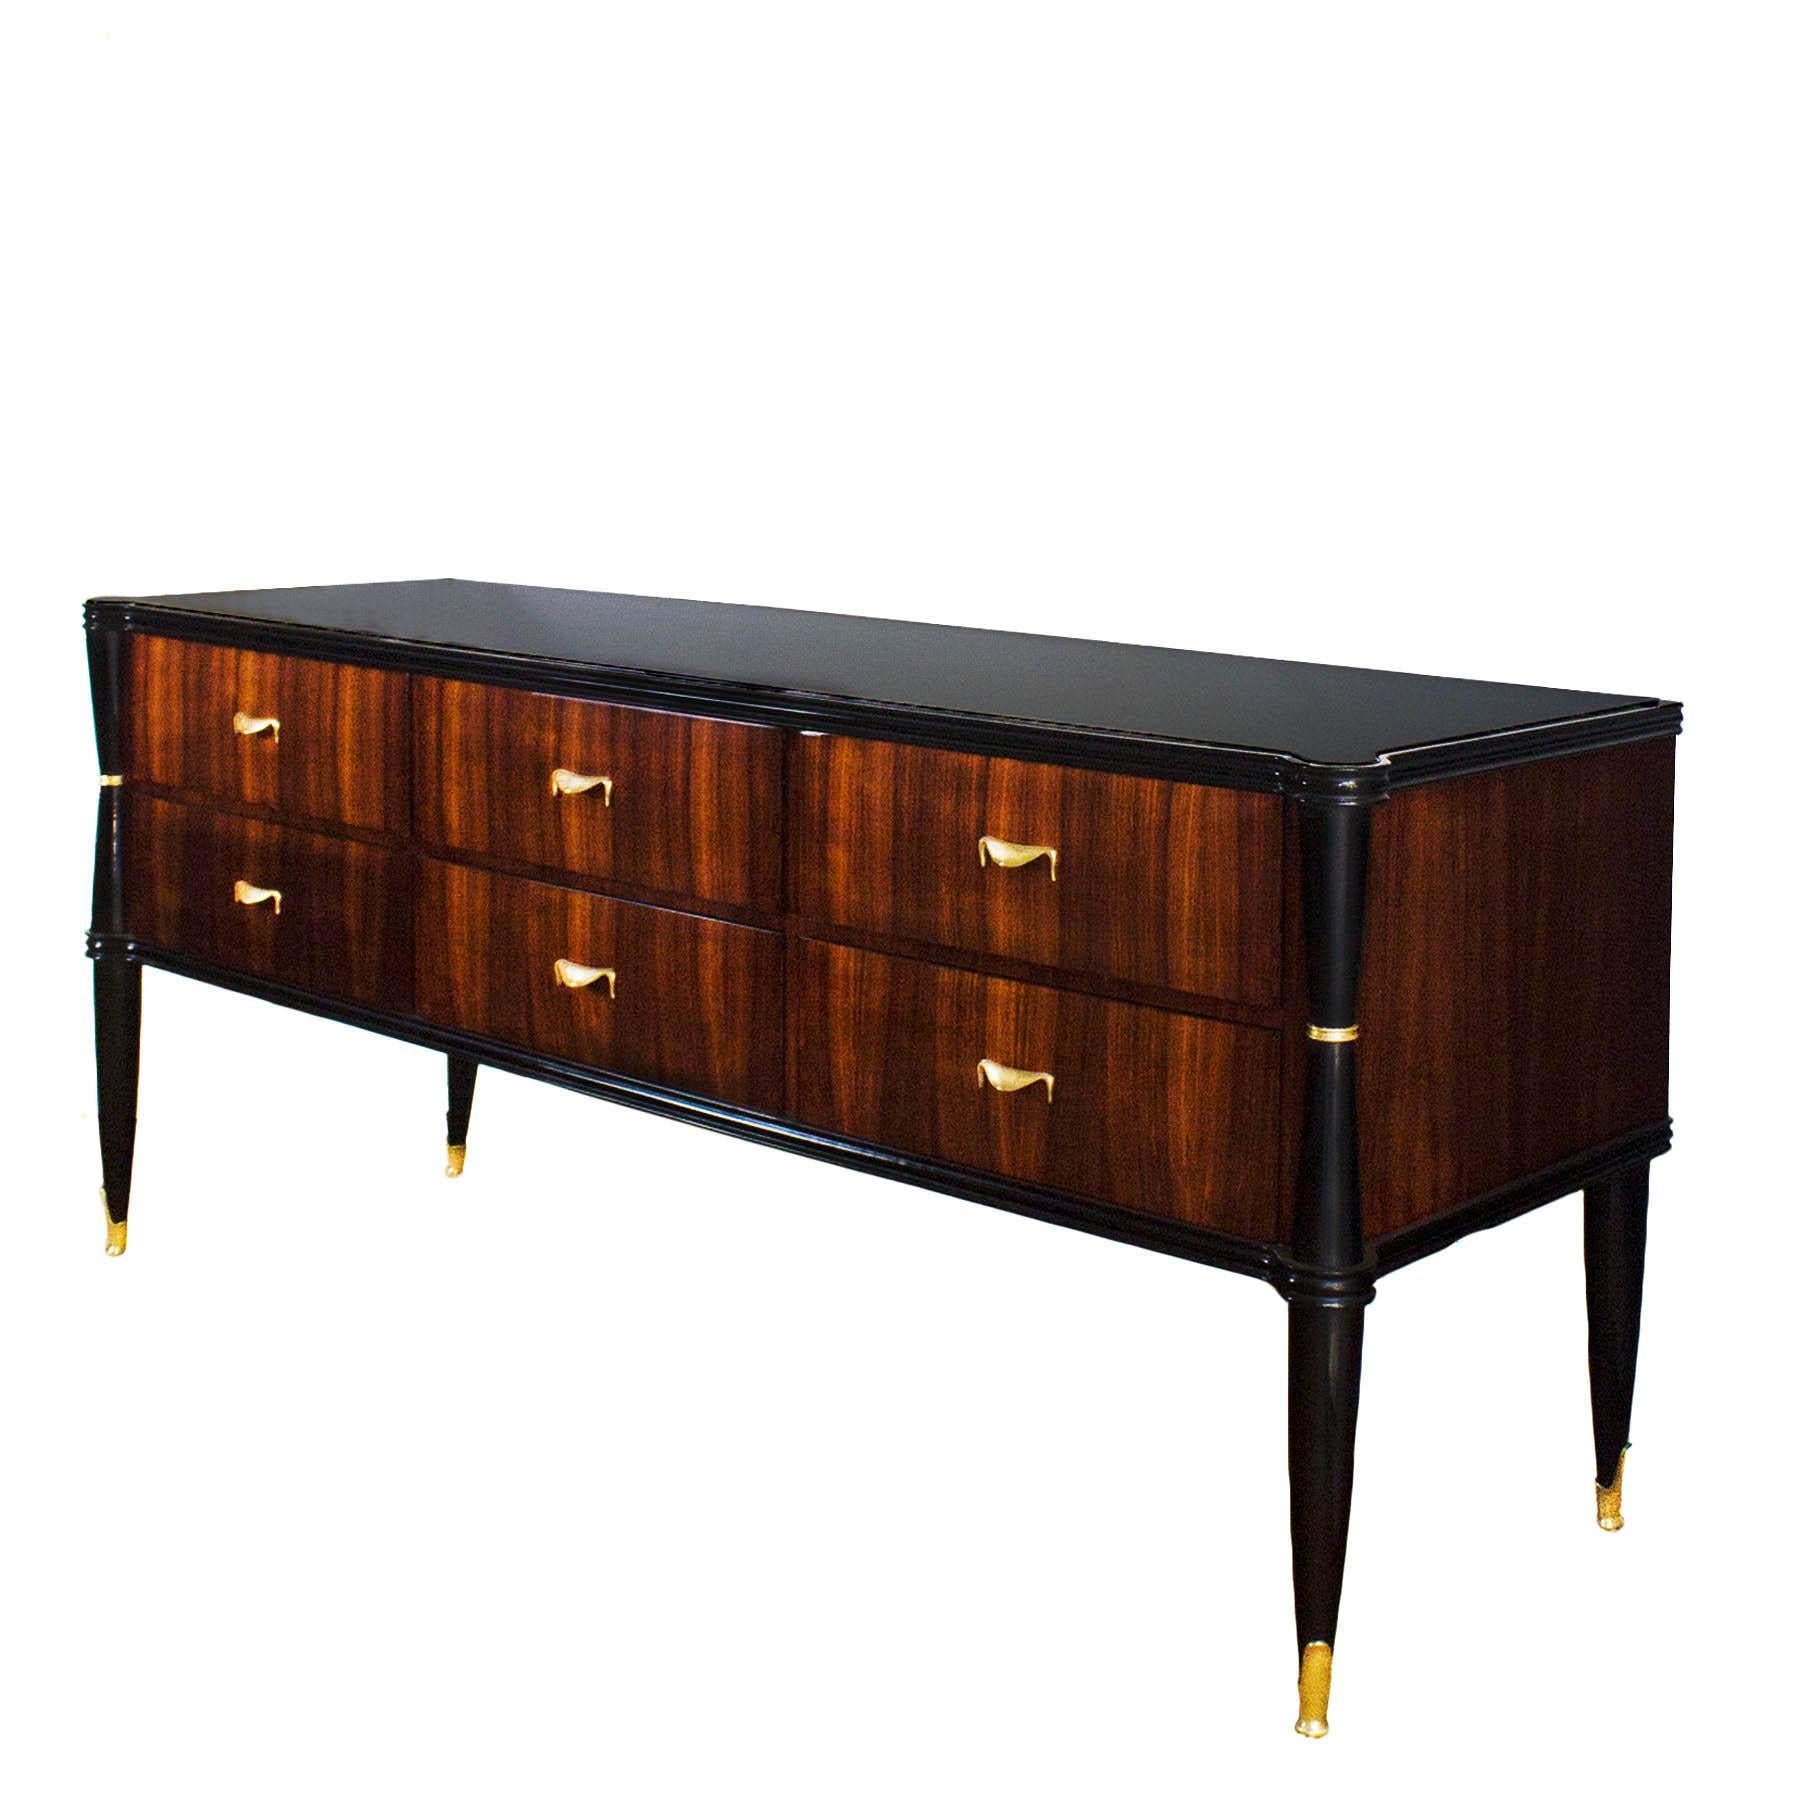 Big commode, six-drawer, mahogany veneer, stained mahogany stands, French polish. Drawers interiors in ashwood. Polished brass handles and feet. Black opaline on top.
In the style of Vittorio Dassi

Italy, circa 1940.